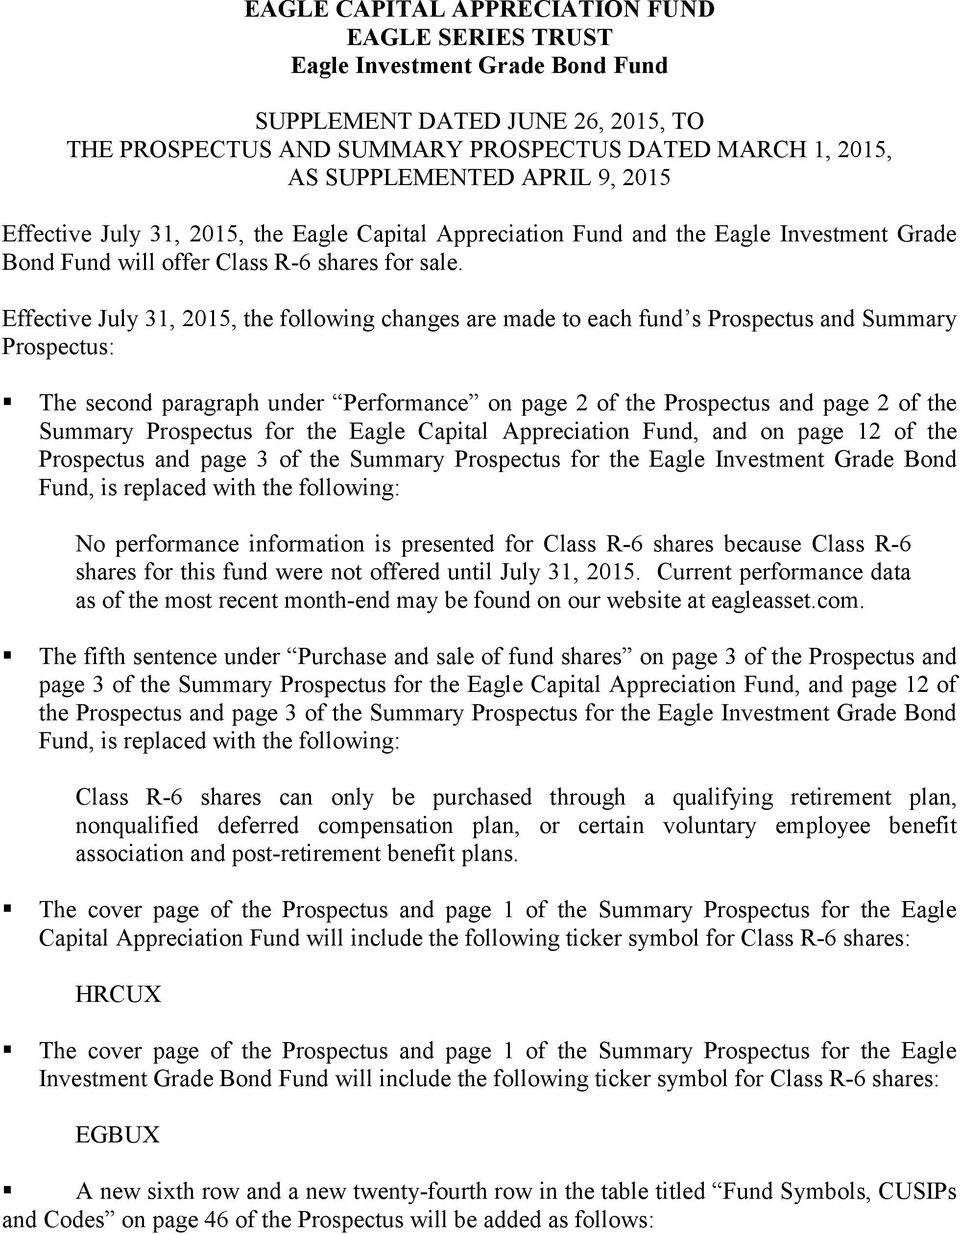 Effective July 31, 2015, the following changes are made to each fund s Prospectus and Summary Prospectus: The second paragraph under Performance on page 2 of the Prospectus and page 2 of the Summary